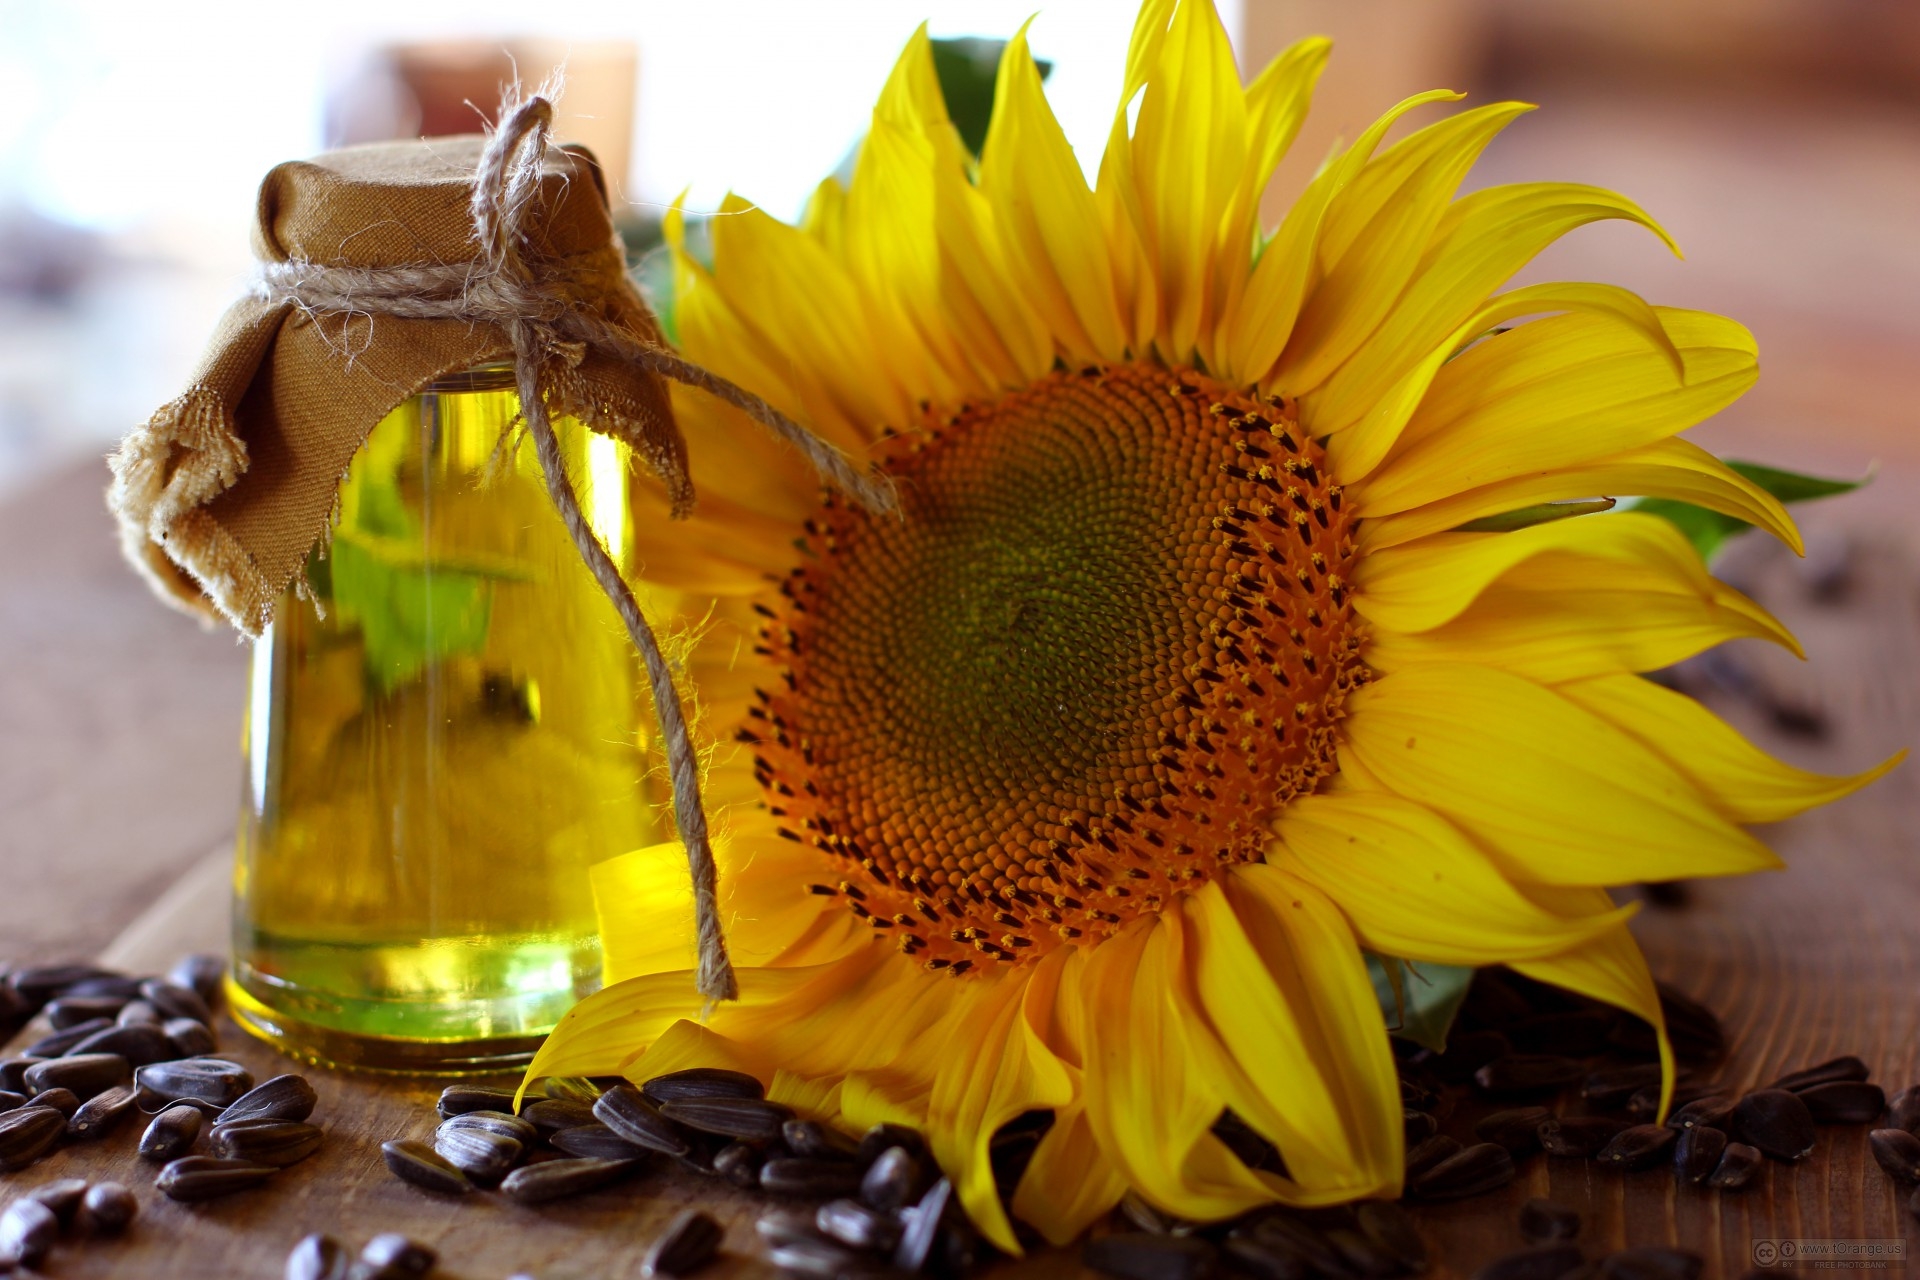 Sunflower prices in Ukraine fall under the pressure of falling markets vegetable oils